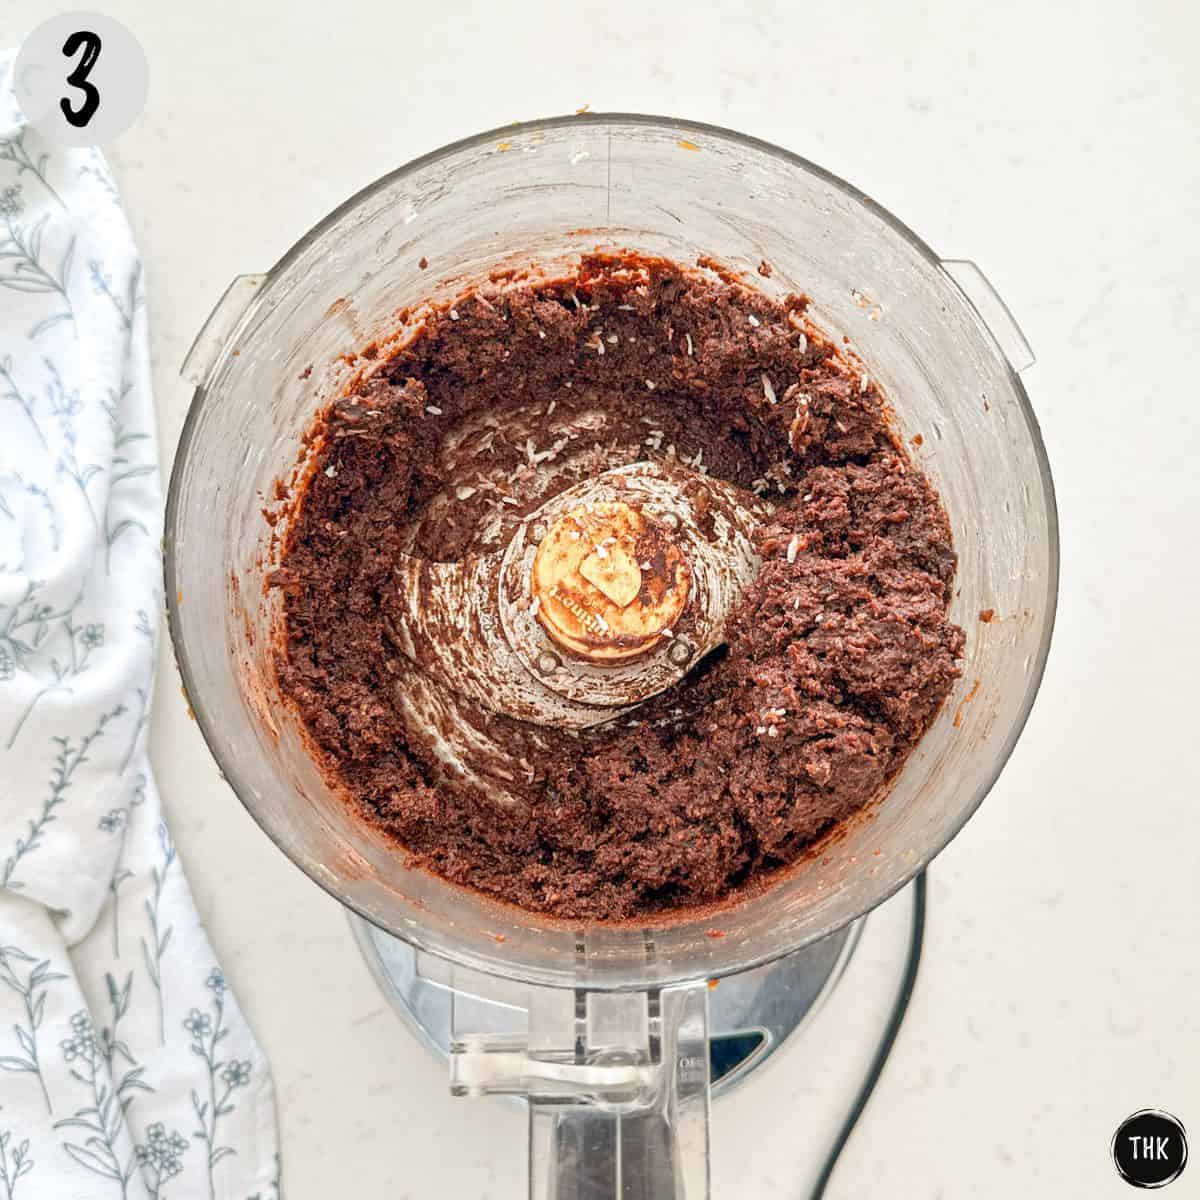 Blended chocolate mixture inside bowl of food processor.